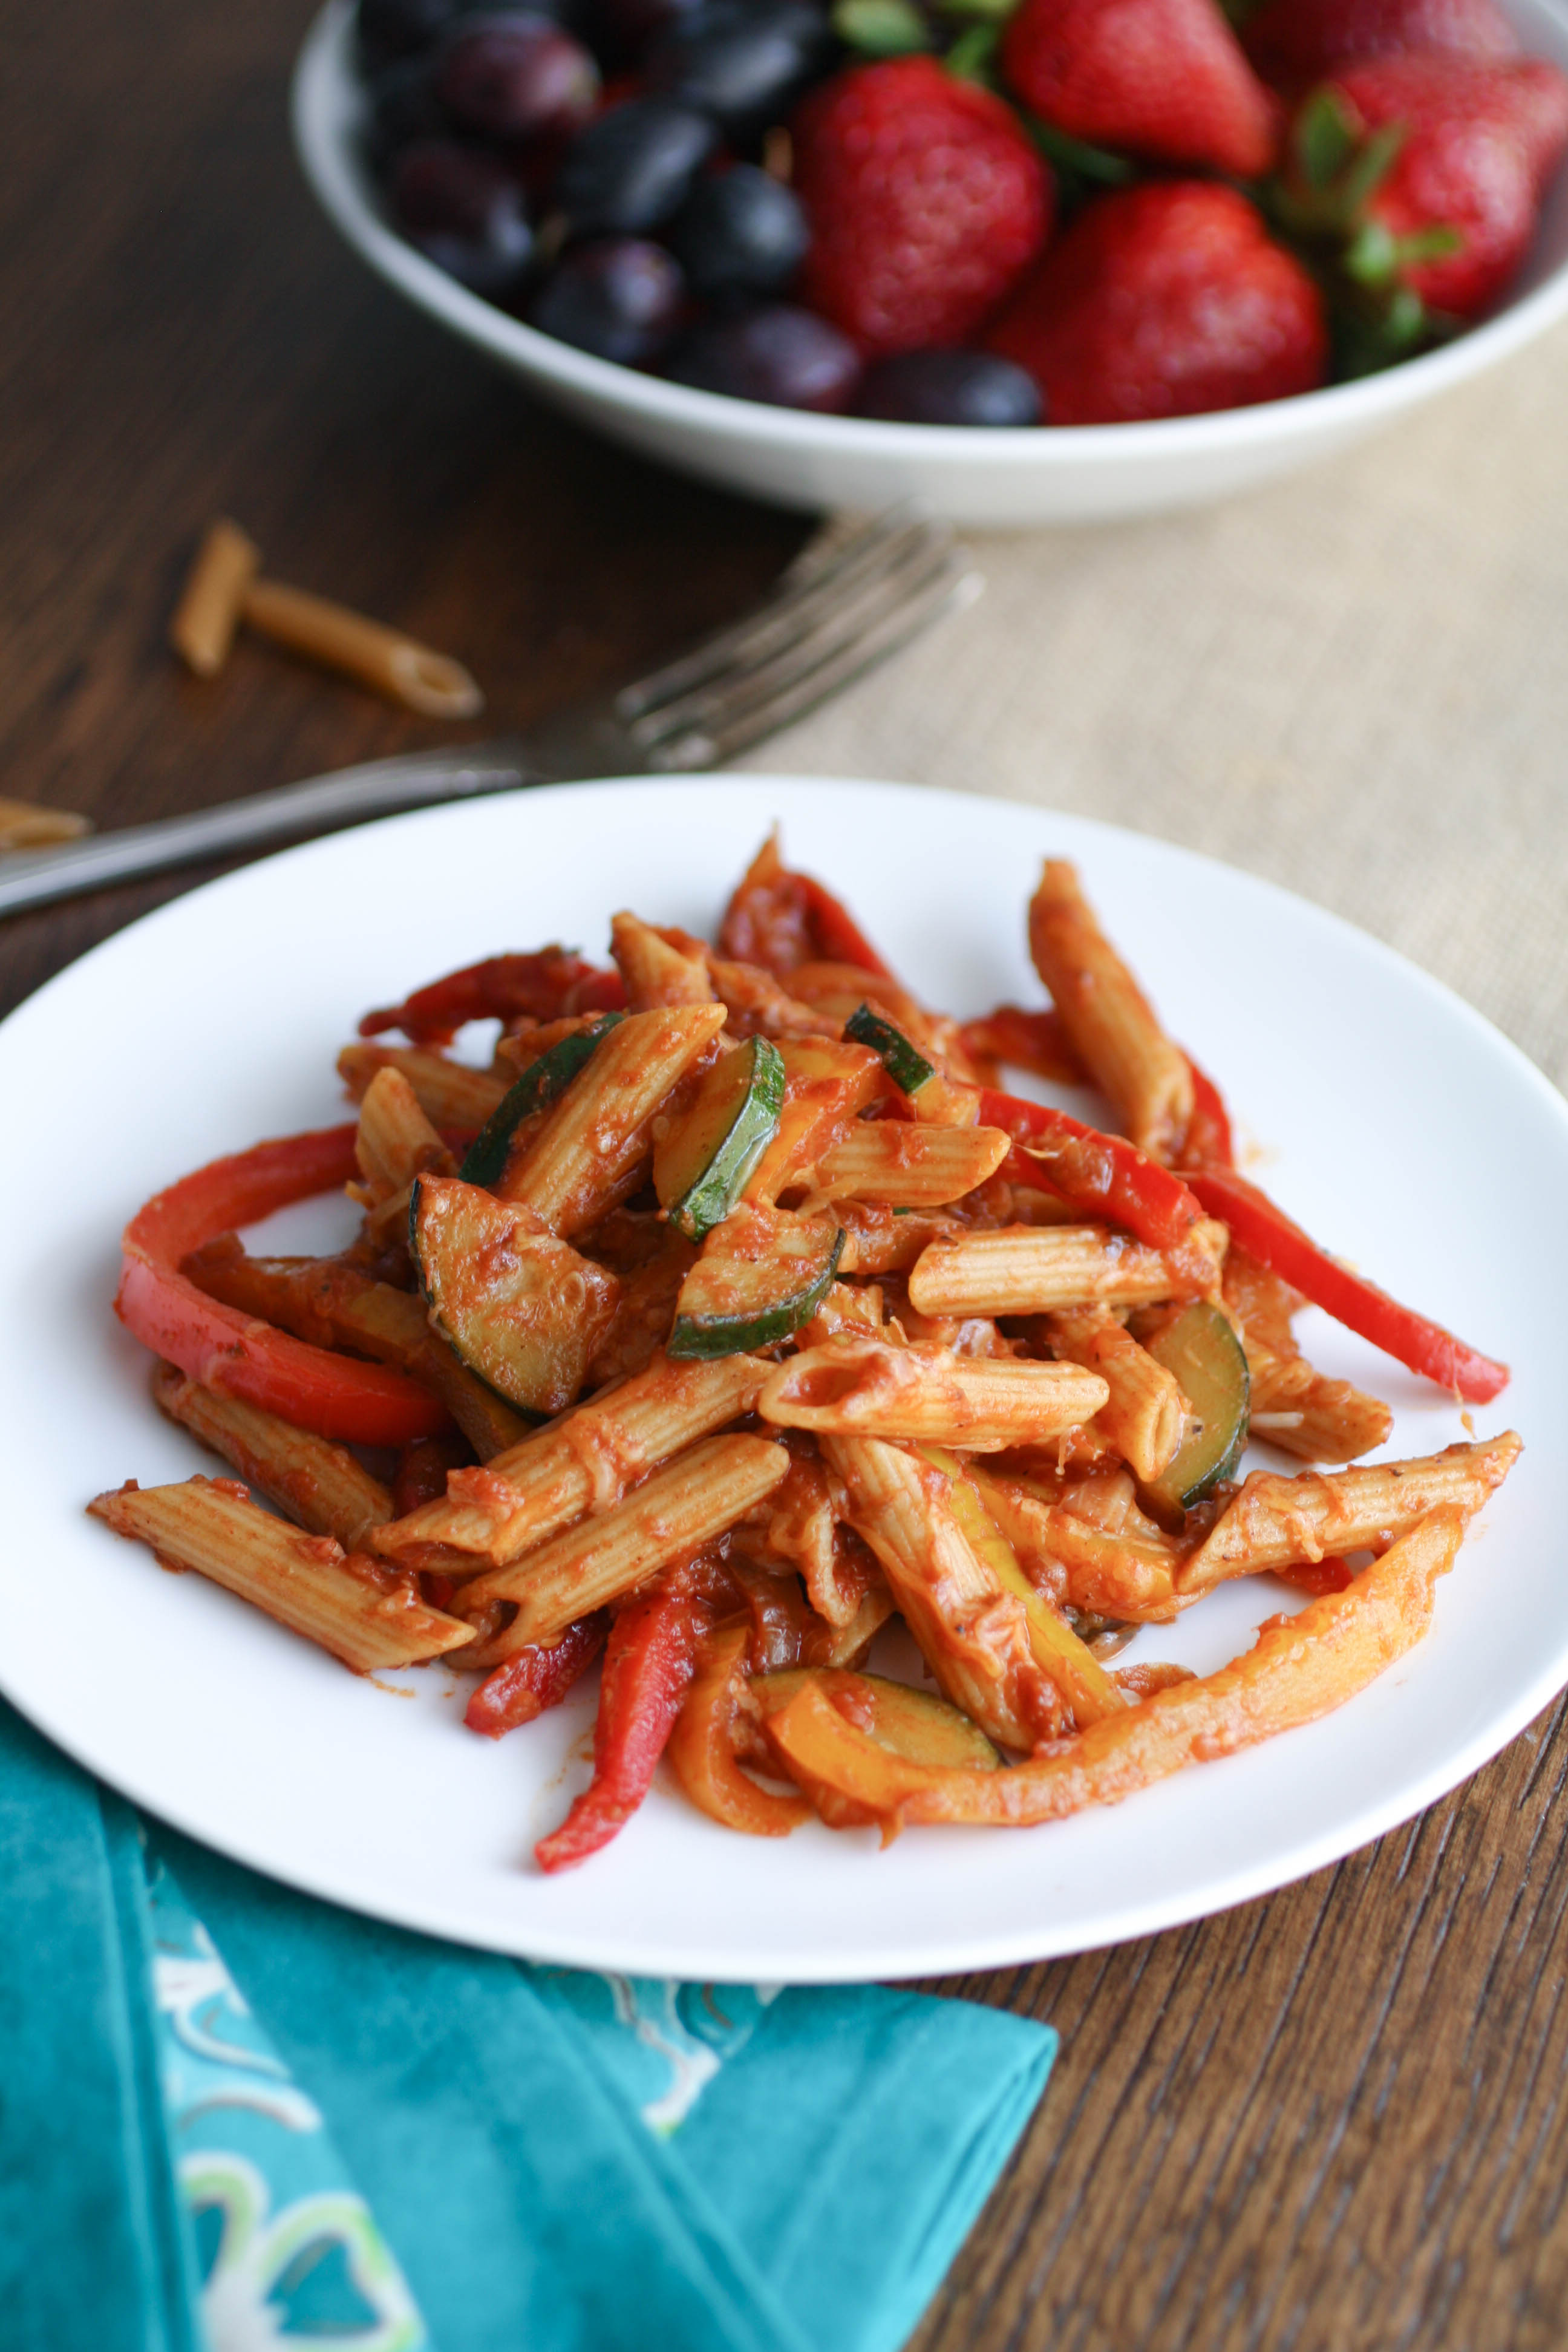 Fajita Pasta makes a fabulous meal! Try it tonight for something filling and flavorful!